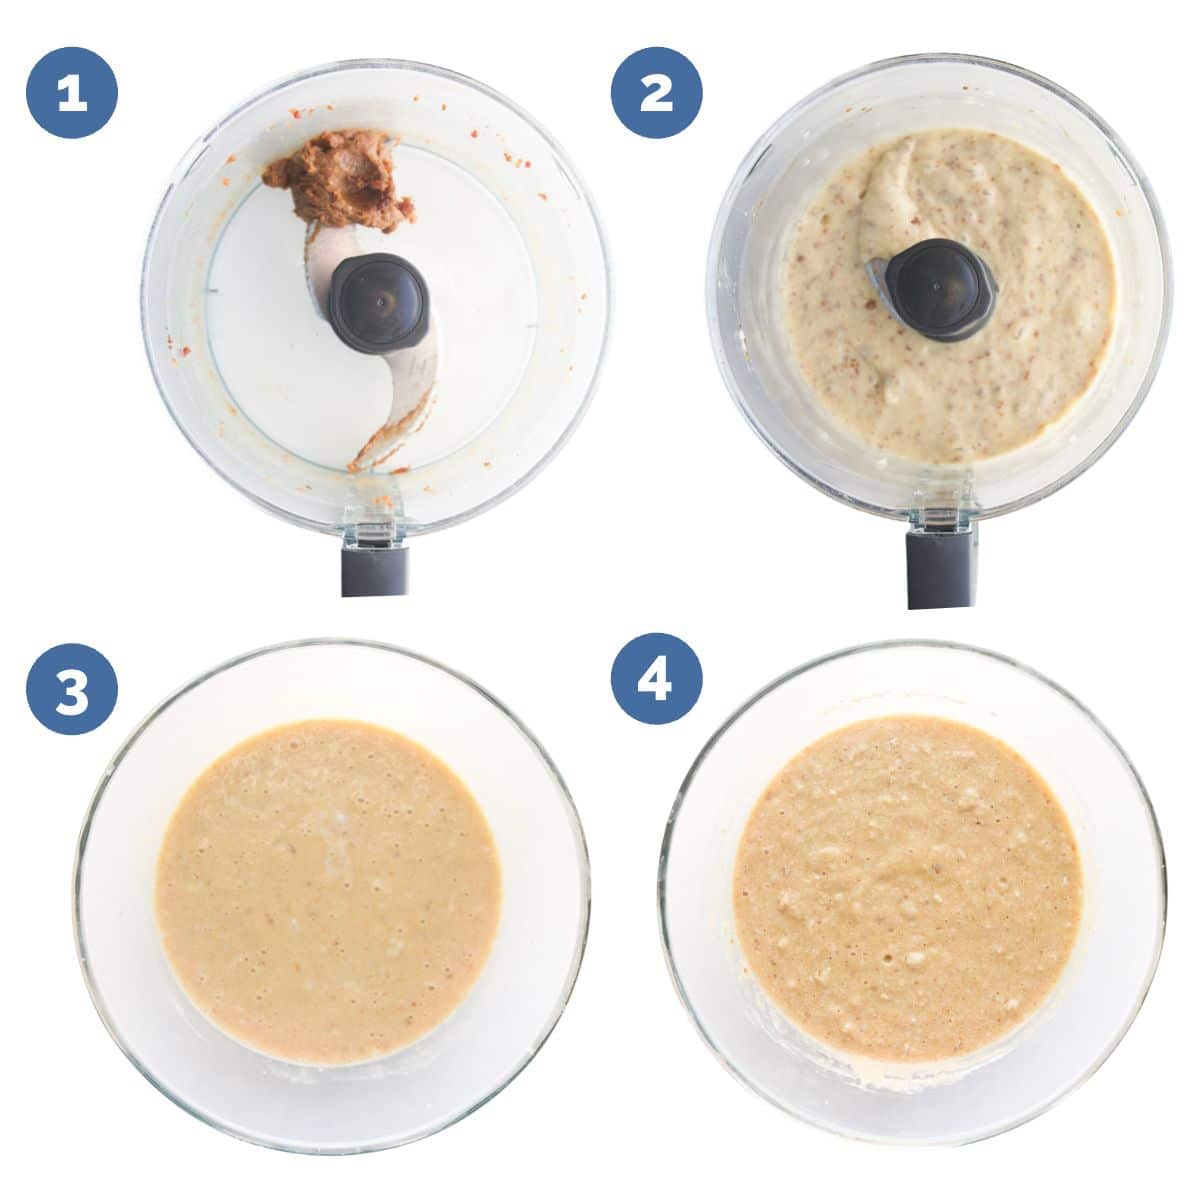 Collage of 4 Images Showing How to Make the Batter for a Healthy Smash Cake. 1) Blend Dates in Food Processor 2) Add and Blend Bananas 3) Wet Ingredients in Bowl 4) Wet and Dry Ingredients Combined in Bowl. 